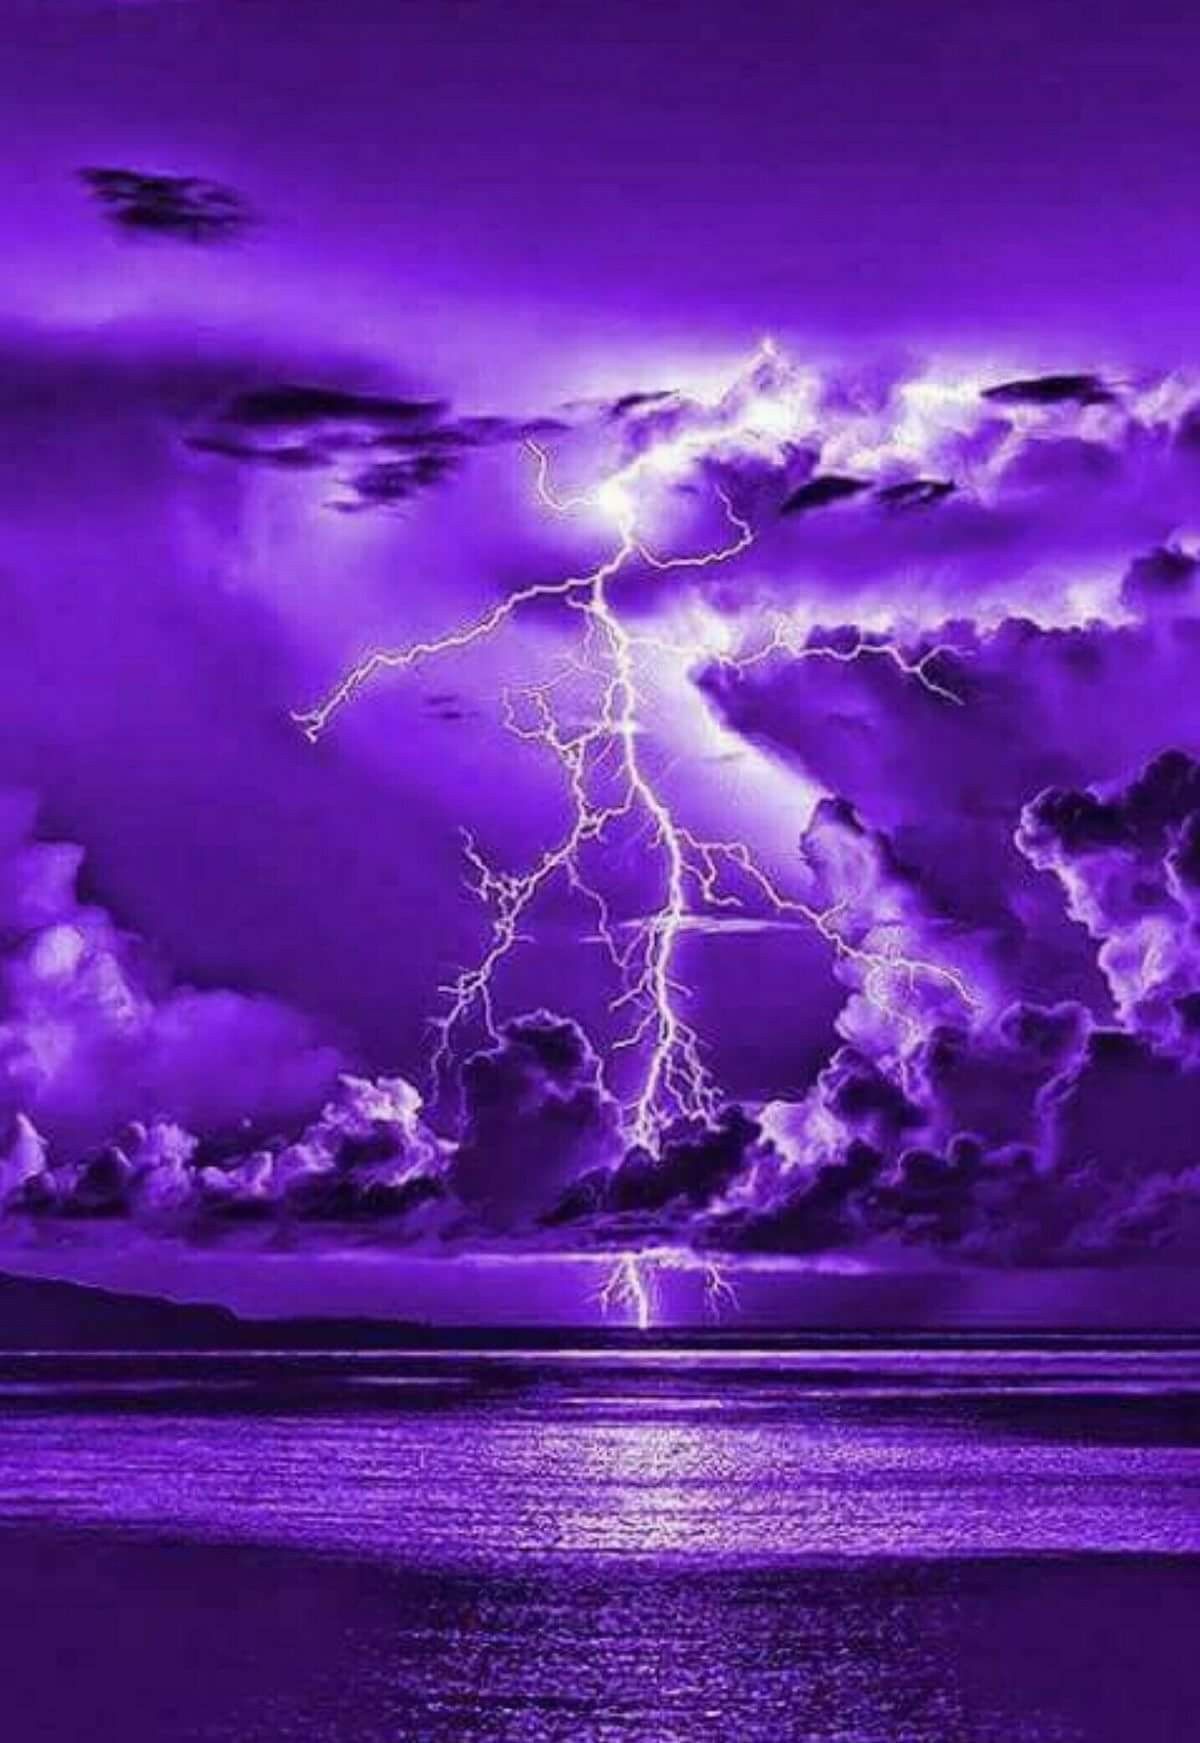 stormy clouds and lightning over the sea. All PURPLE! OK